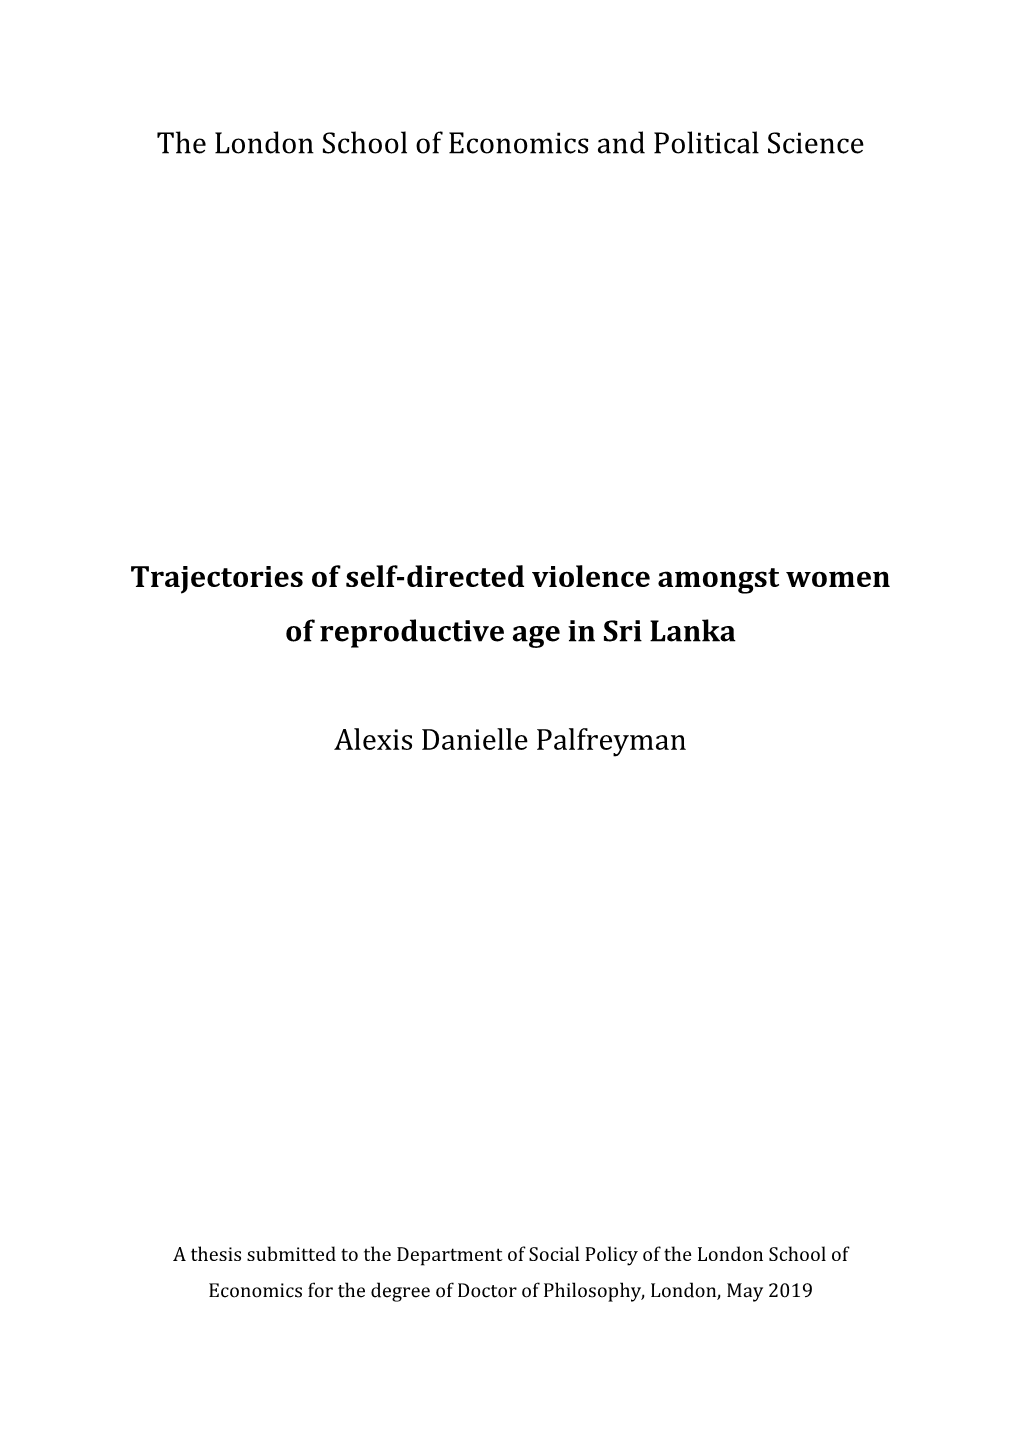 Trajectories of Self-Directed Violence Amongst Women of Reproductive Age in Sri Lanka